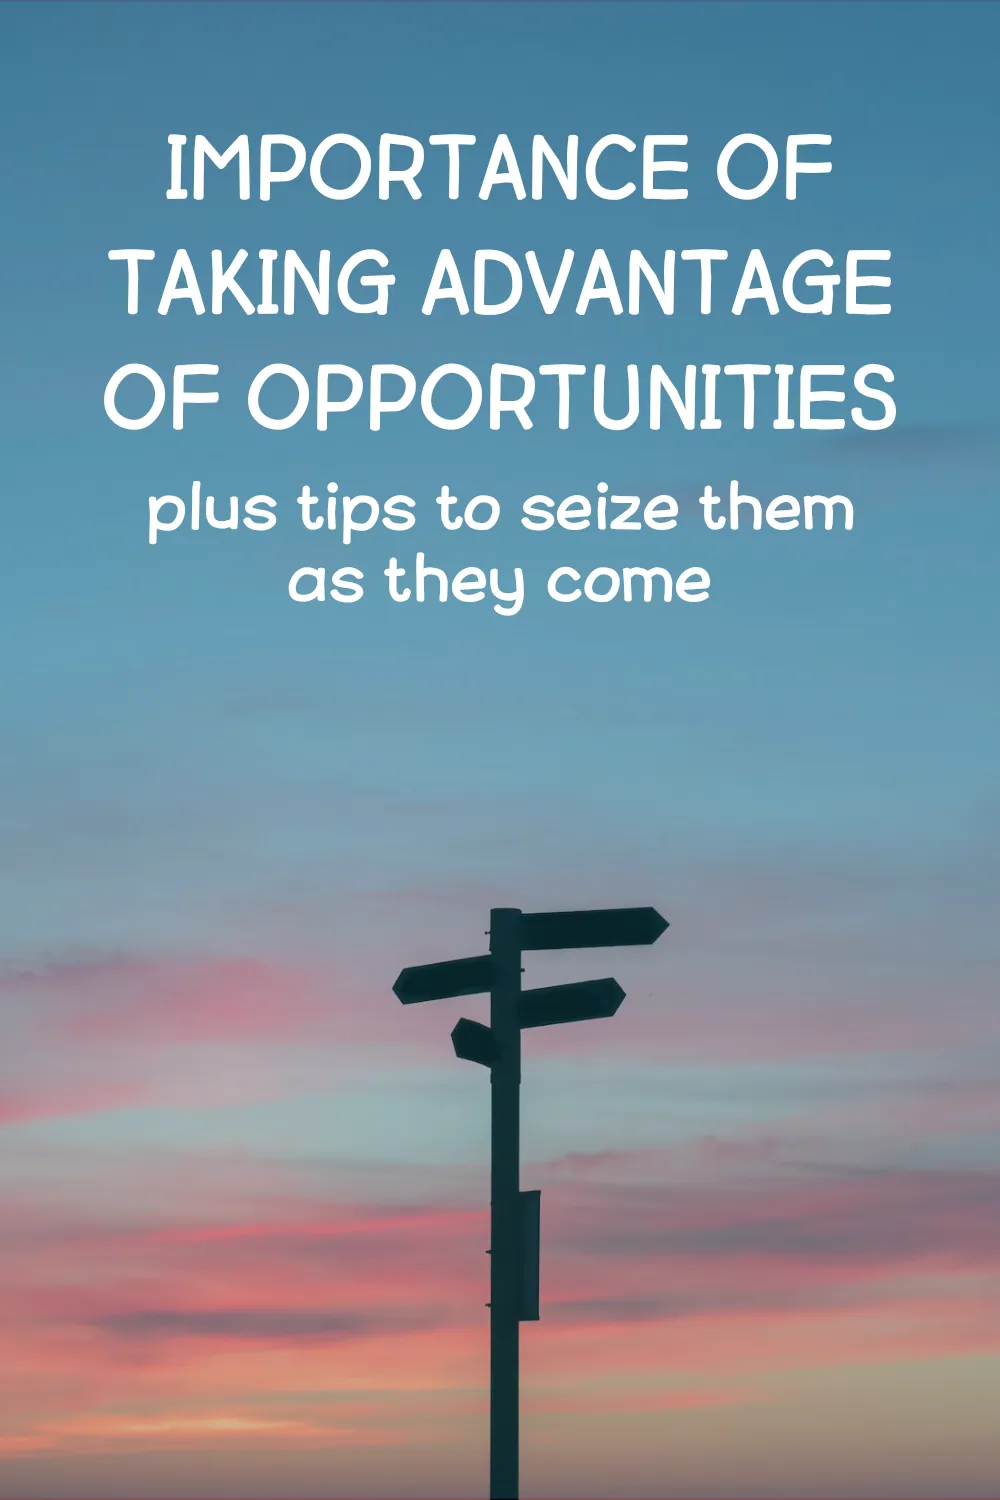 How to take advantage of opportunities - 7 helpful tips 1